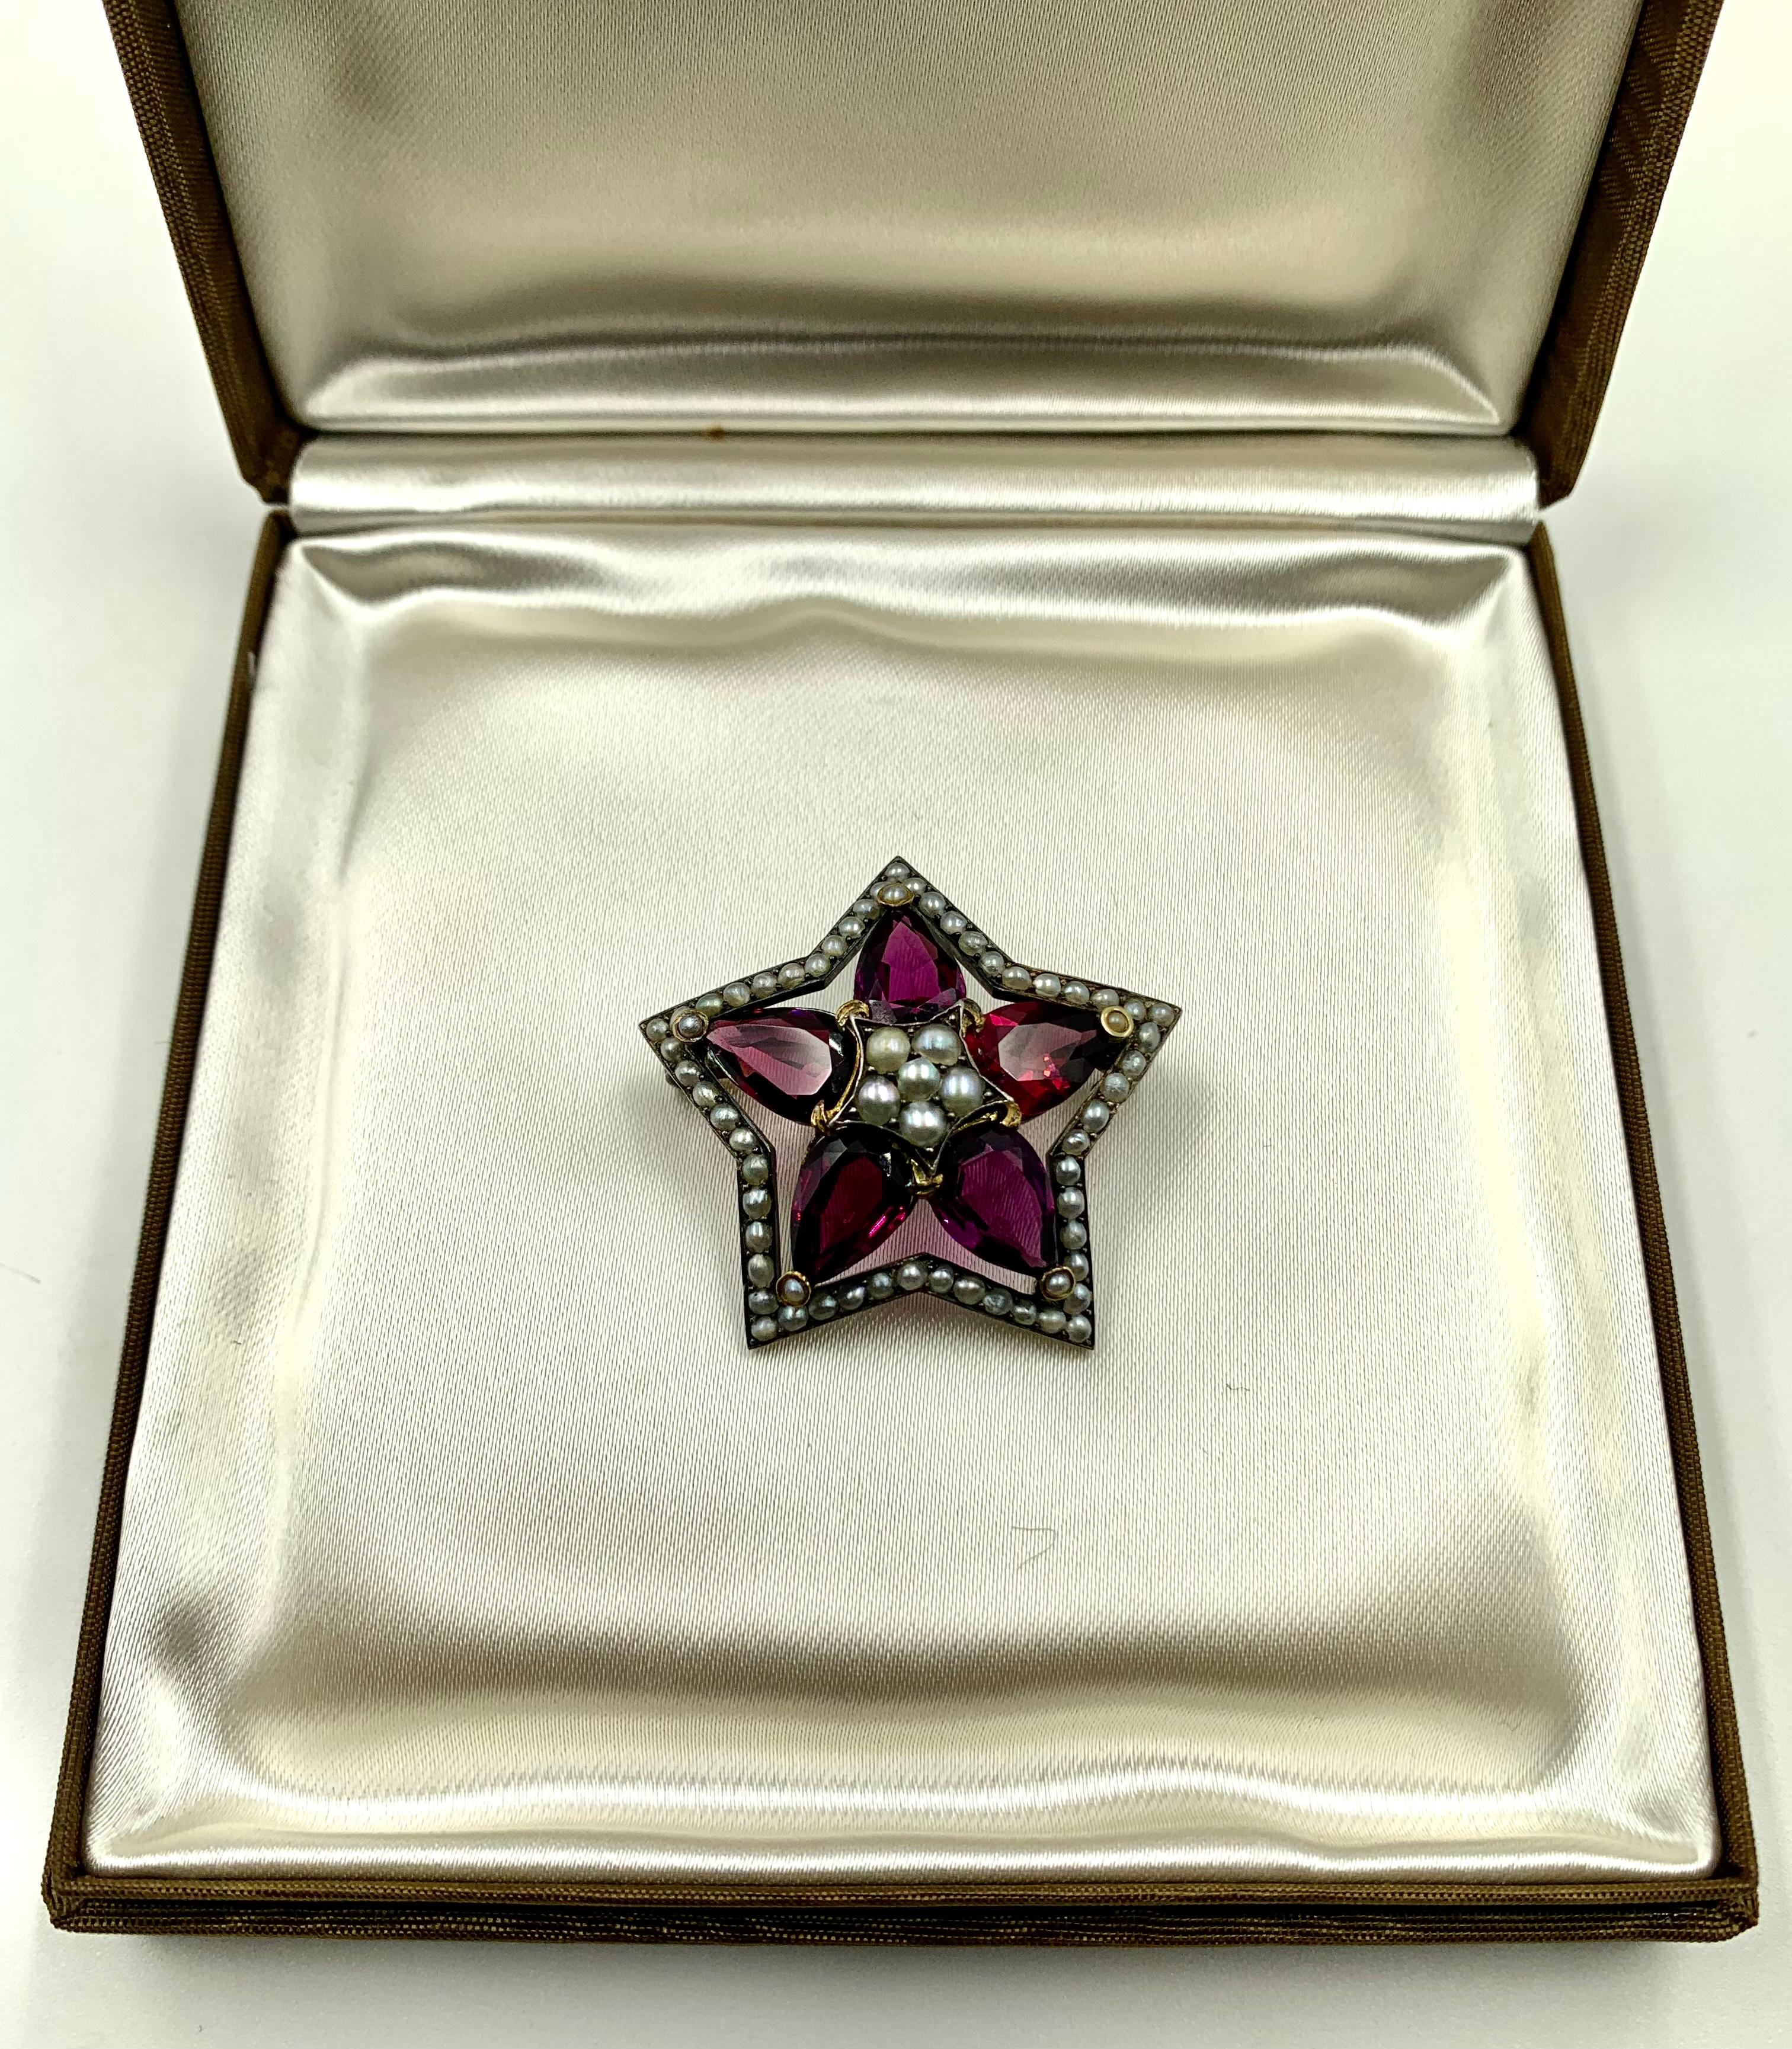 Striking star brooch featuring five rich burgundy colored pear shaped Rhodolite garnets with total carat weight of approximately 11 Carats. 
Apparently unmarked, the center setting tests for 18K gold with the surrounding oxidized setting testing for